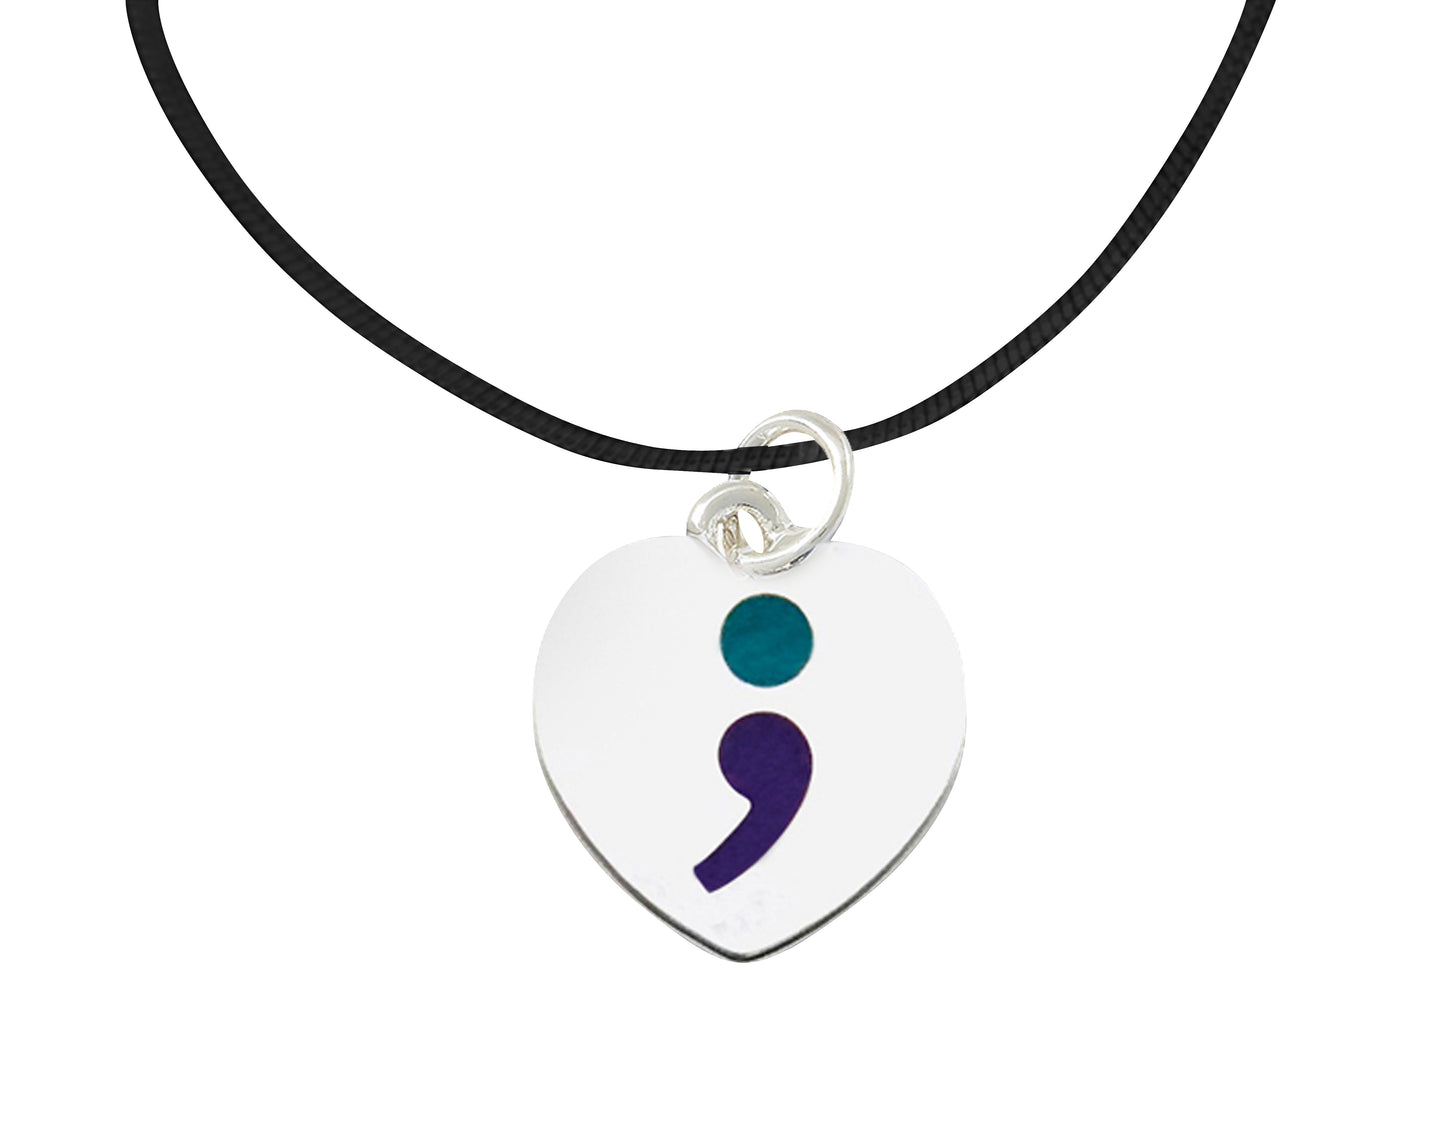 Semicolon Suicide Prevention Awareness Leather Cord Necklaces - Fundraising For A Cause